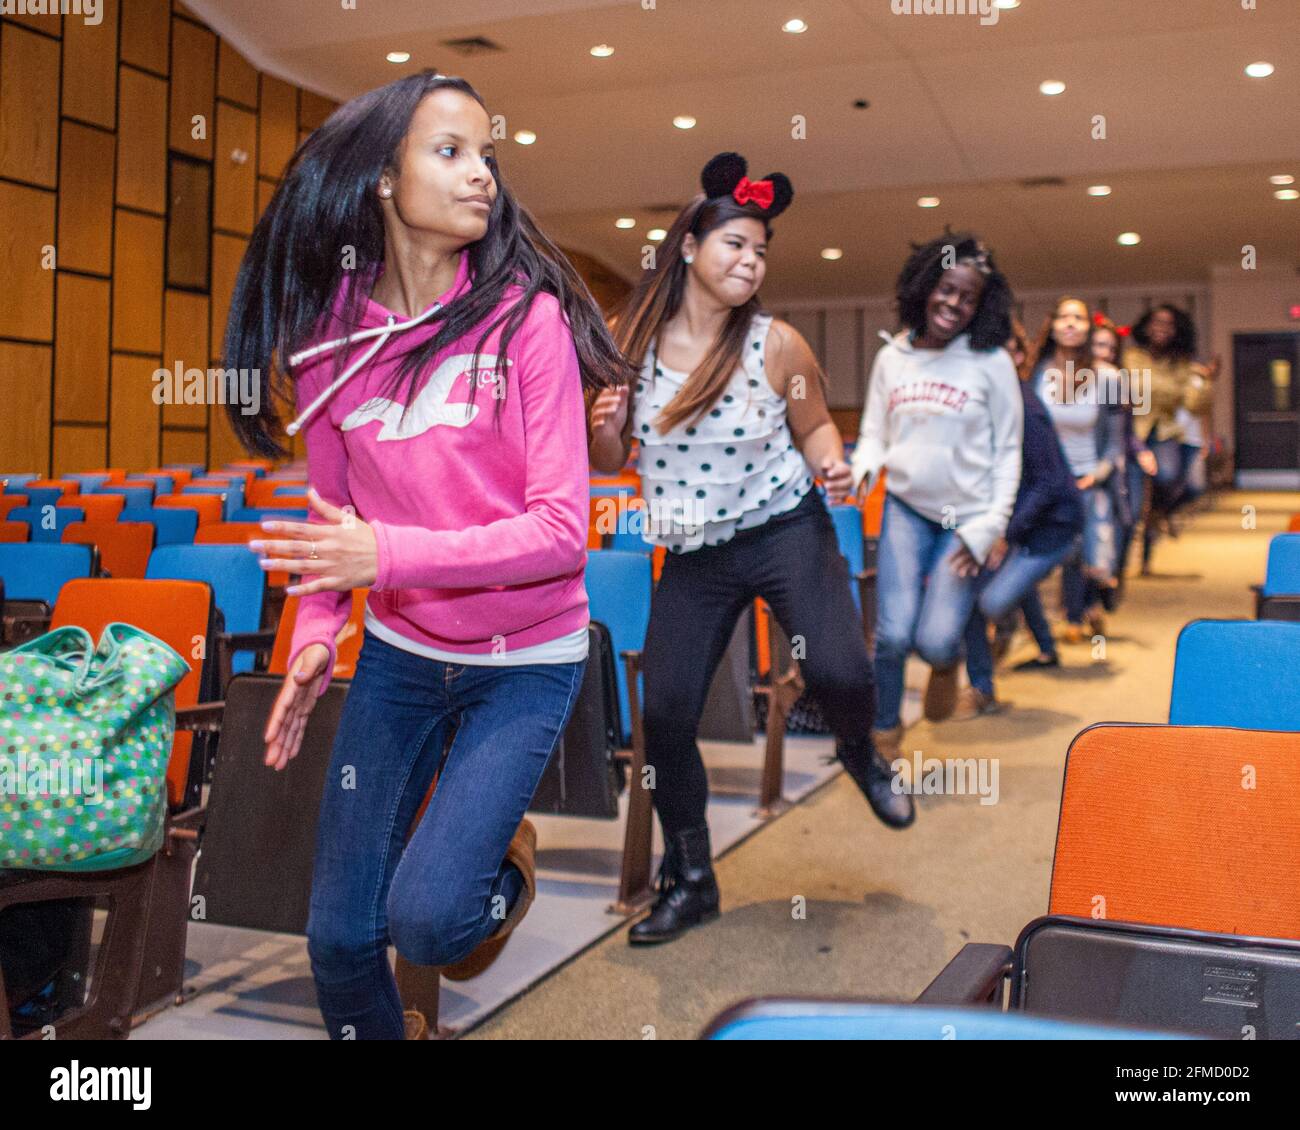 Students rehearsing for a show in the school auditorium Stock Photo